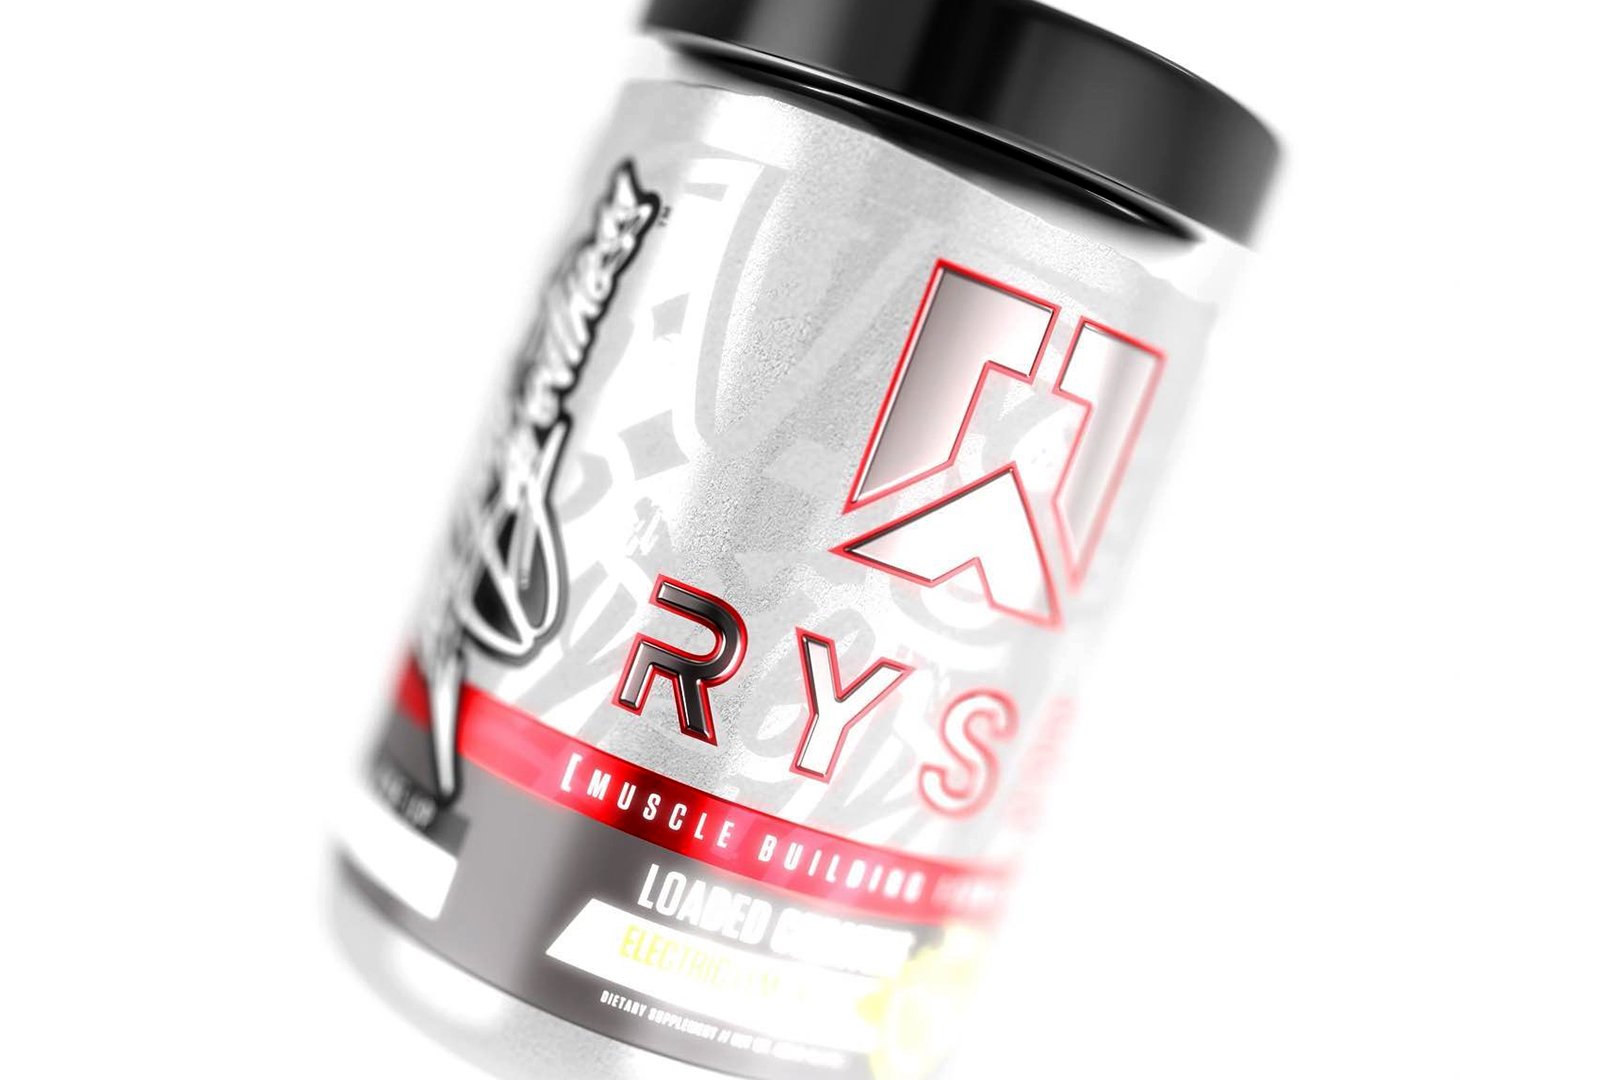 Ryse Previews Potential Loaded Creatine